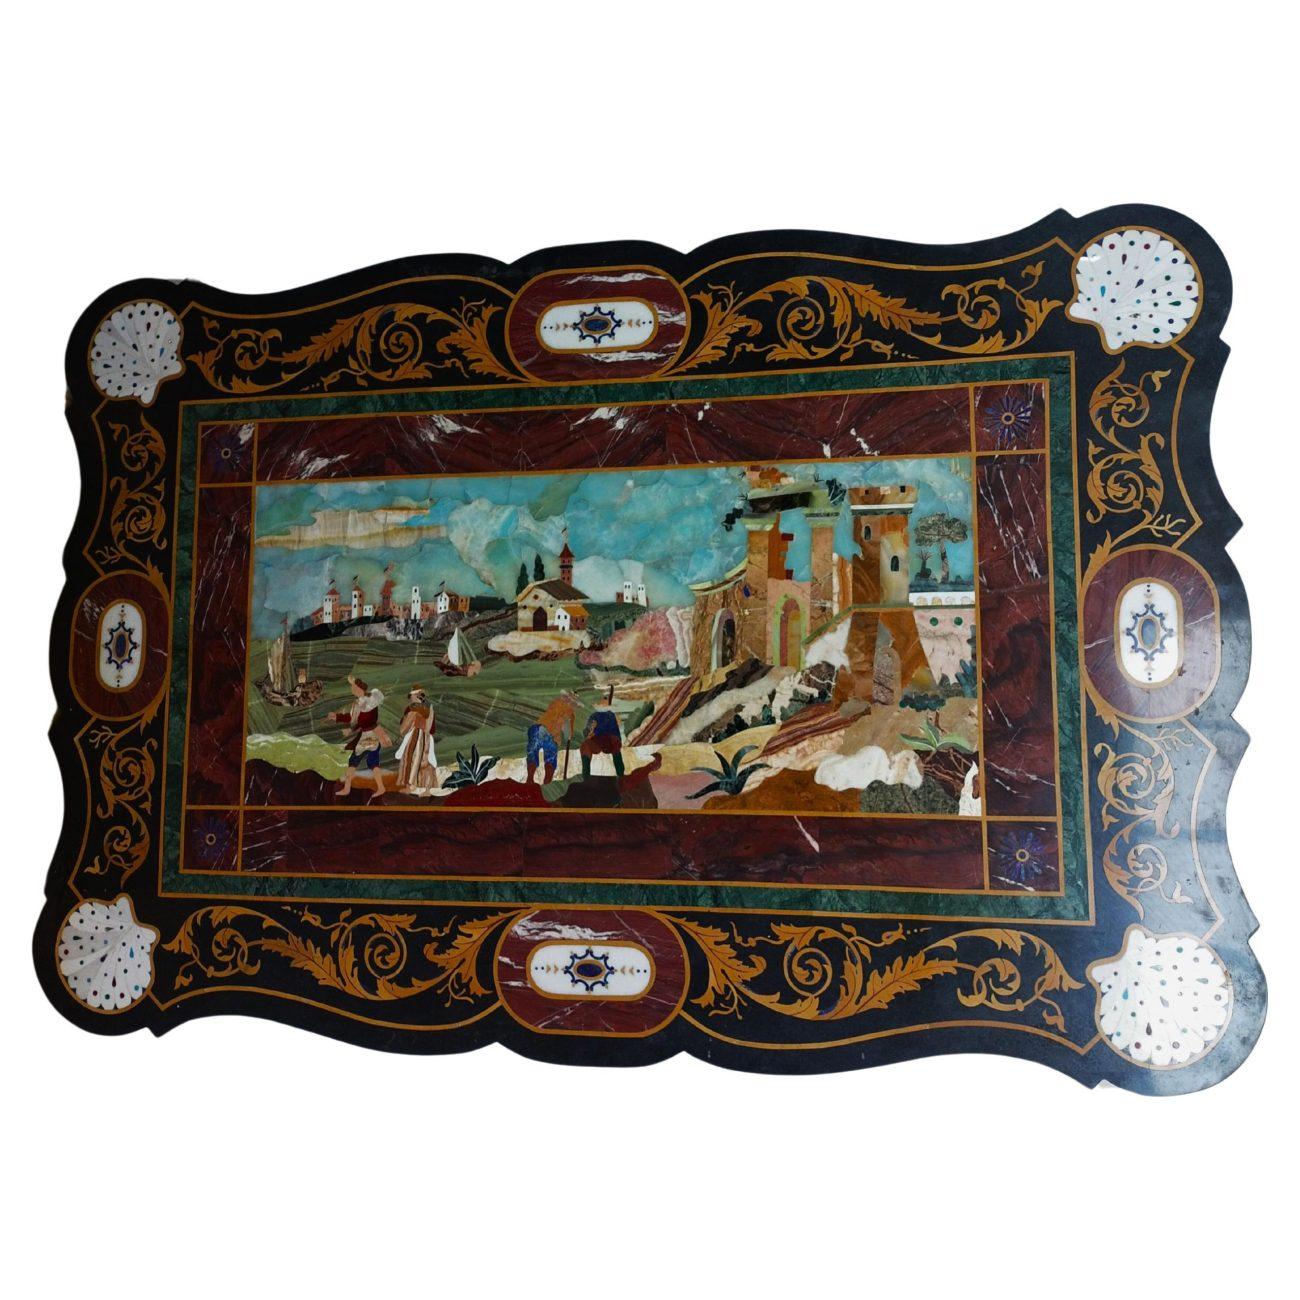 Panel - Neapolitan Countryside Landscape In Good Condition For Sale In Rome, IT